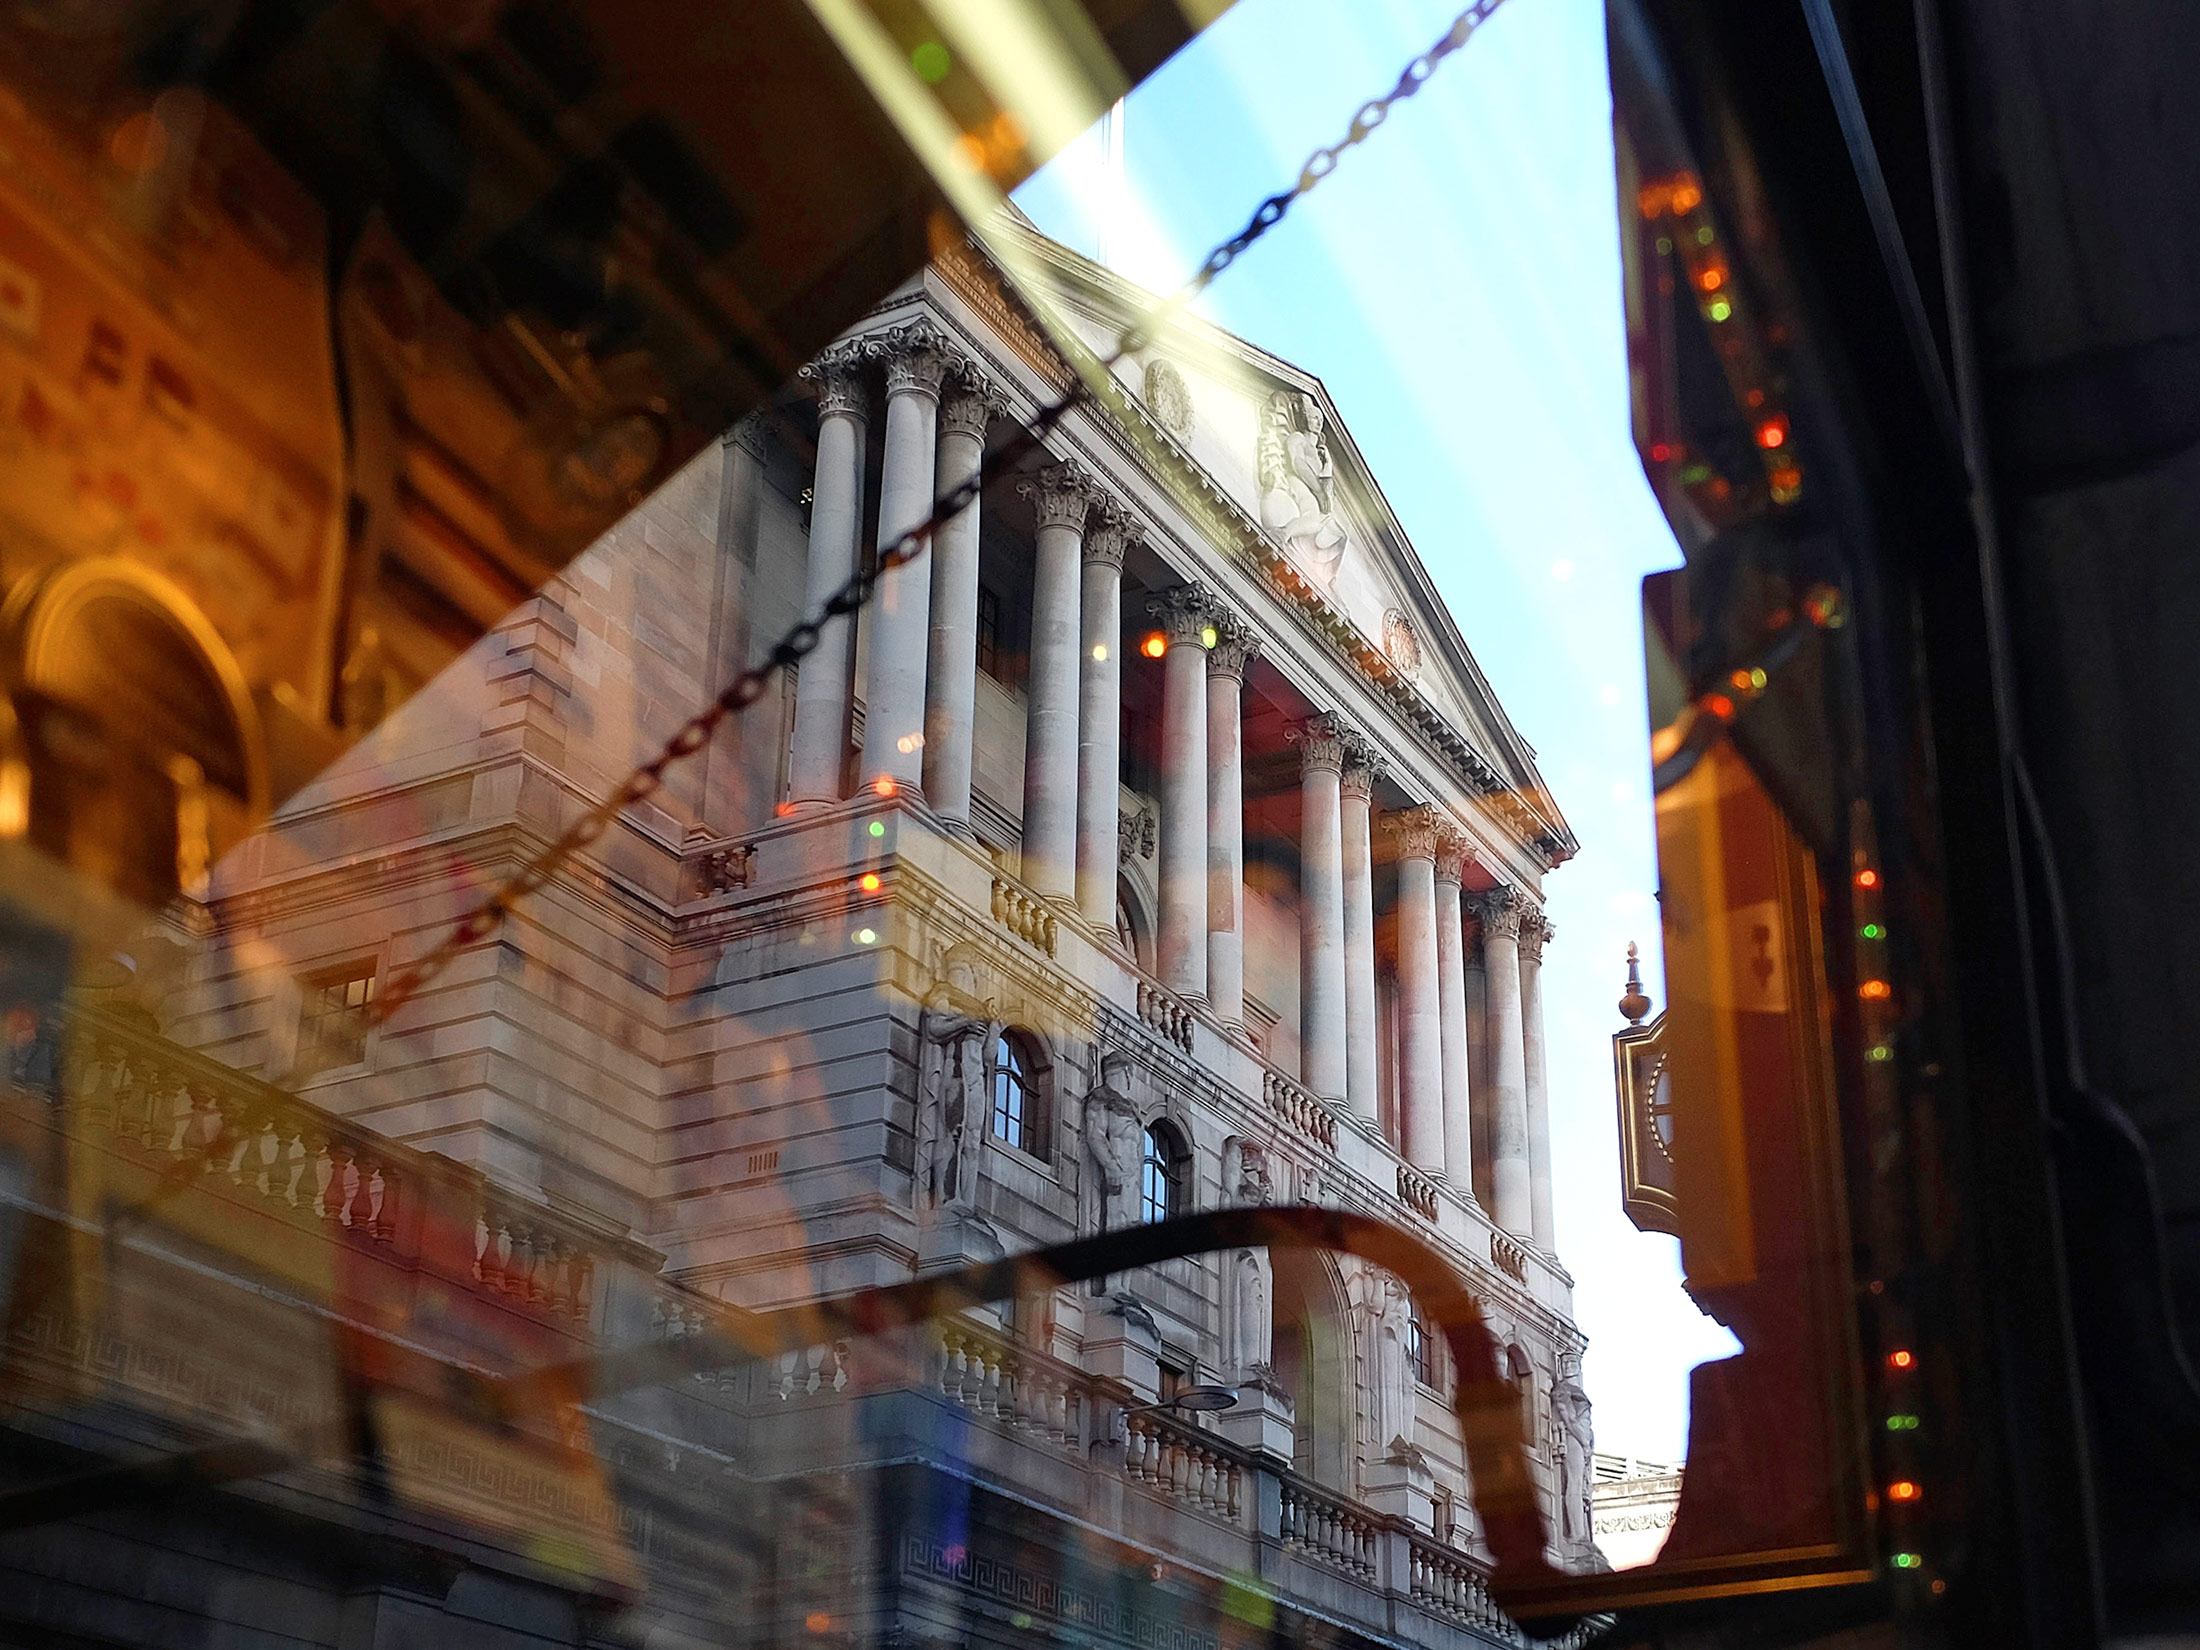 The Bank of England in London.
